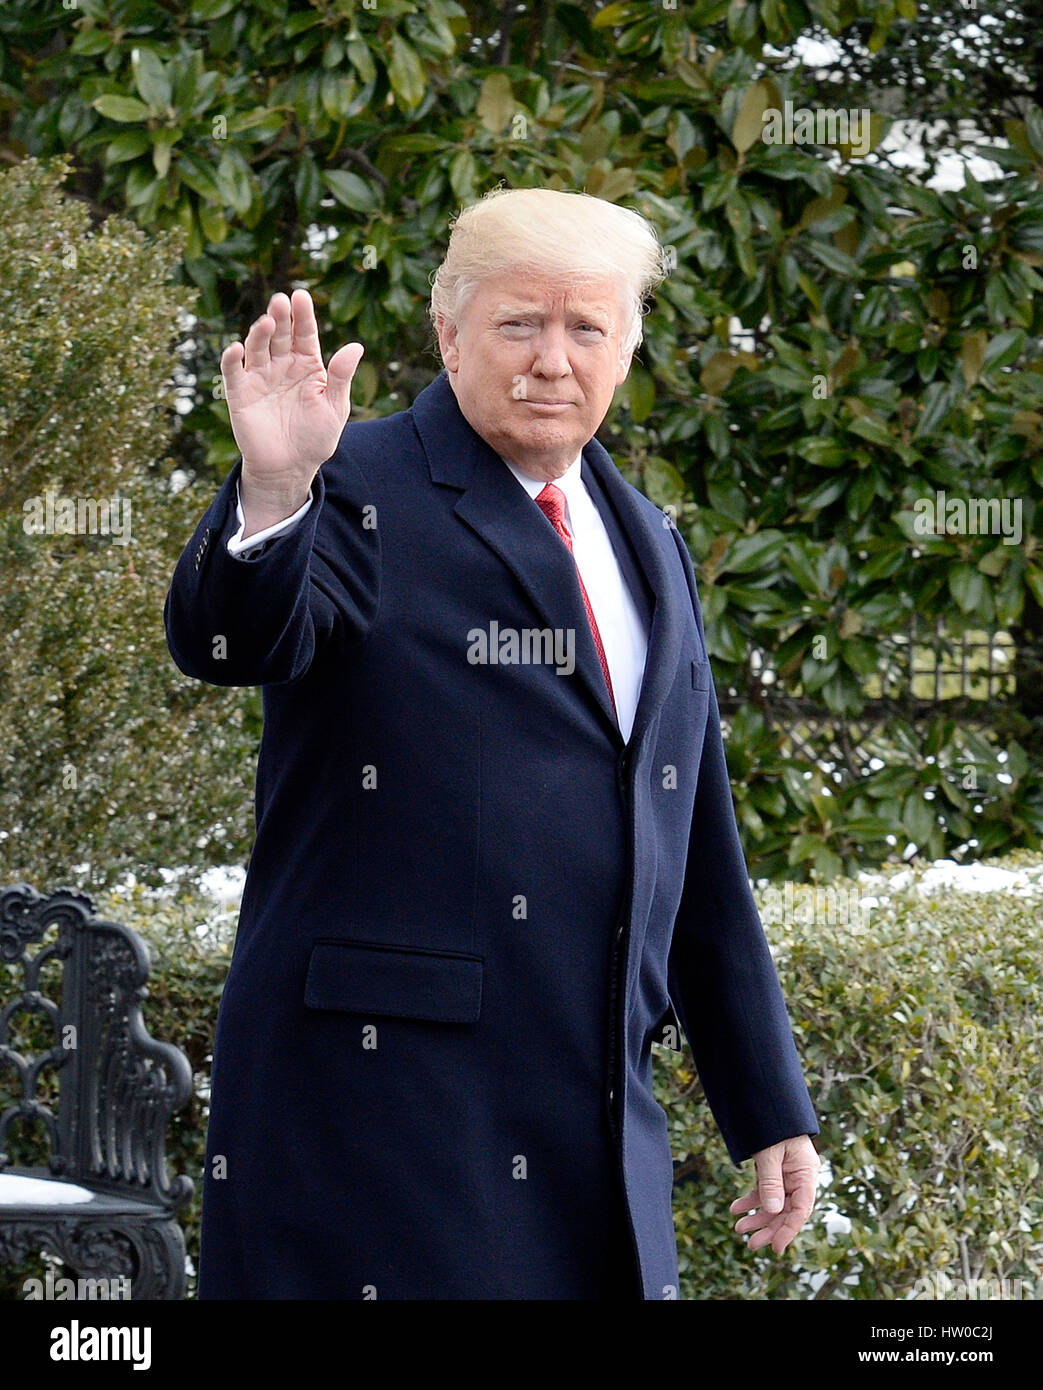 Washington DC, USA 15th March 2017 United States President Donald J Trump walks on the South Lawn of the White House toward Marine One as he departs the White House on March 15, 2017 in Washington, DC The President will attend events in Michigan and Tenne Stock Photo